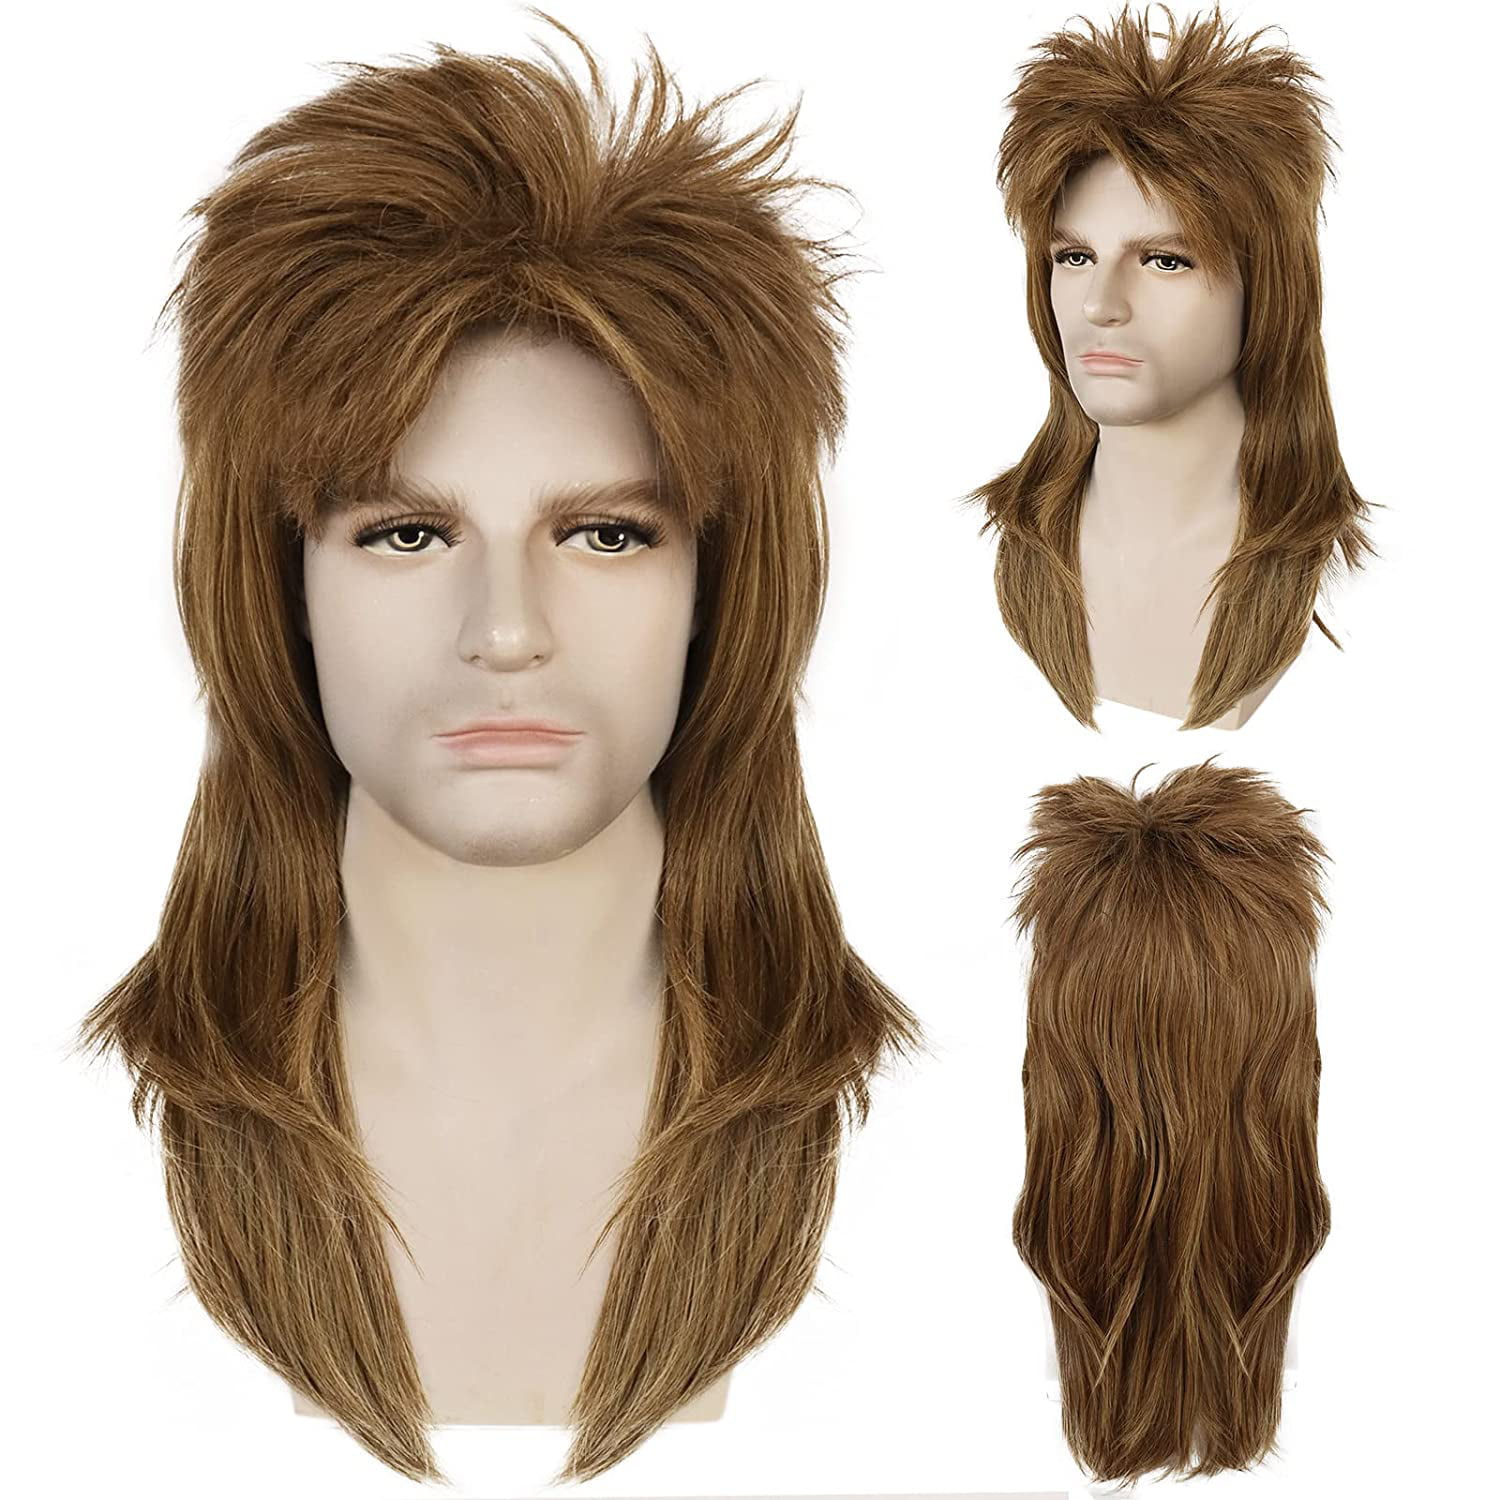 ANOGOL Merica Joe Dirt Cosplay Wig Wayne Campbell Wig Patrick Swayze  Costume Wigs for Adult for Man Brown Shoulder Length Wigs Synthetic Hair  for Halloween Party 